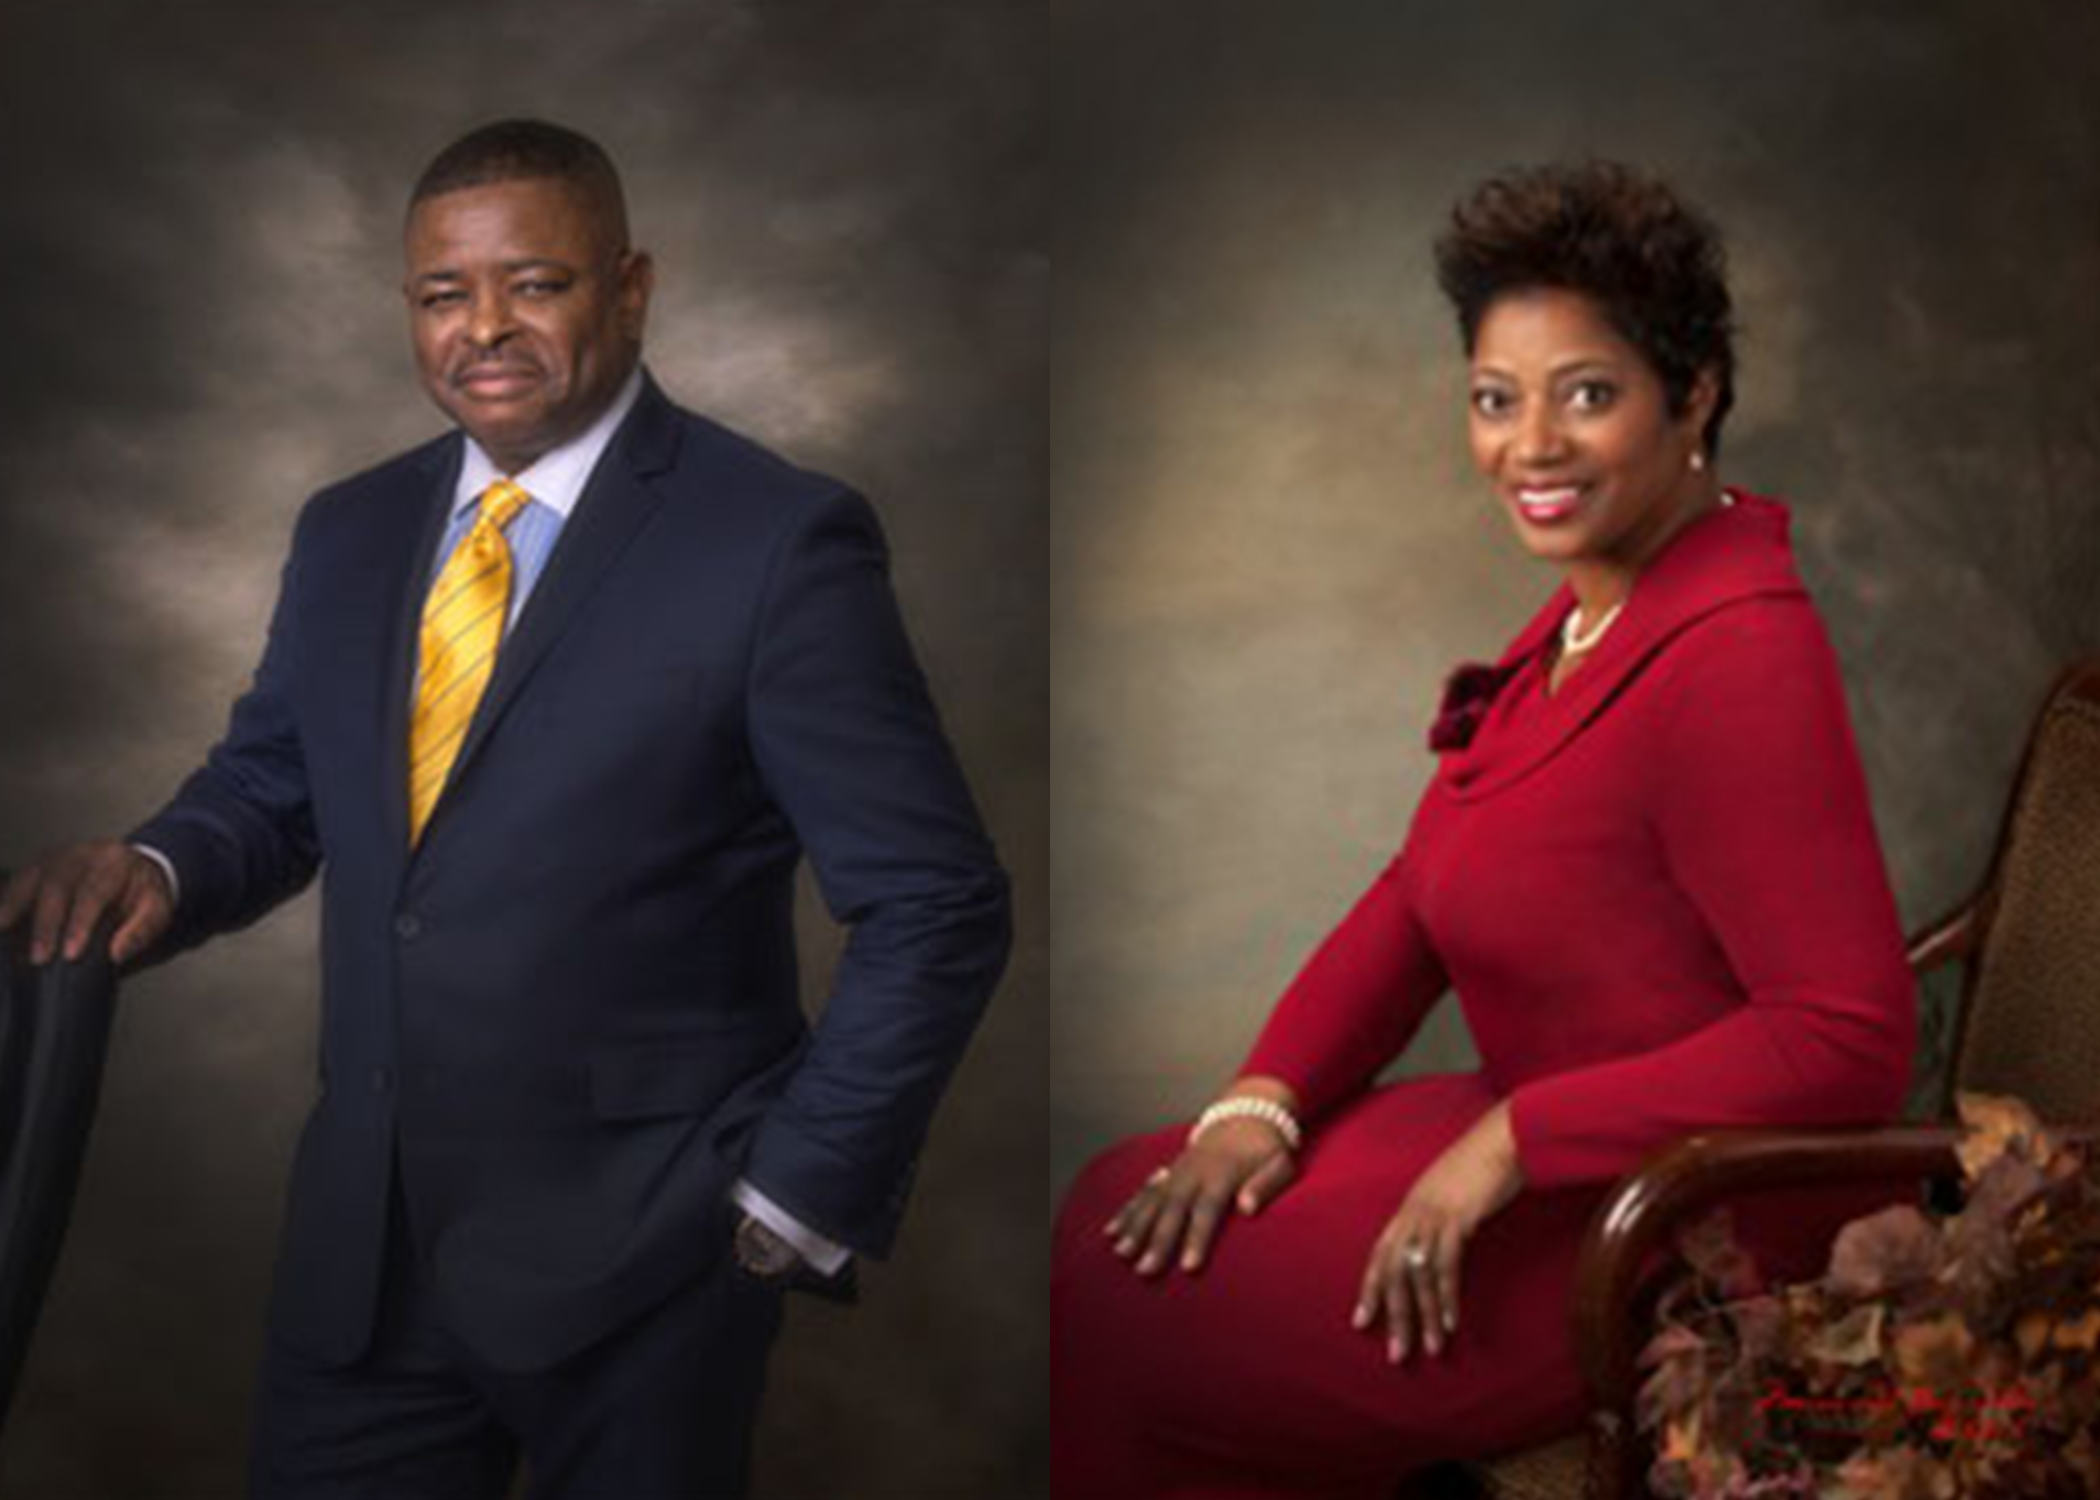 Jackson Municipal Airport Authority Board of Commissioners Elect Martin and Harris to Lead in Fiscal Year 2021